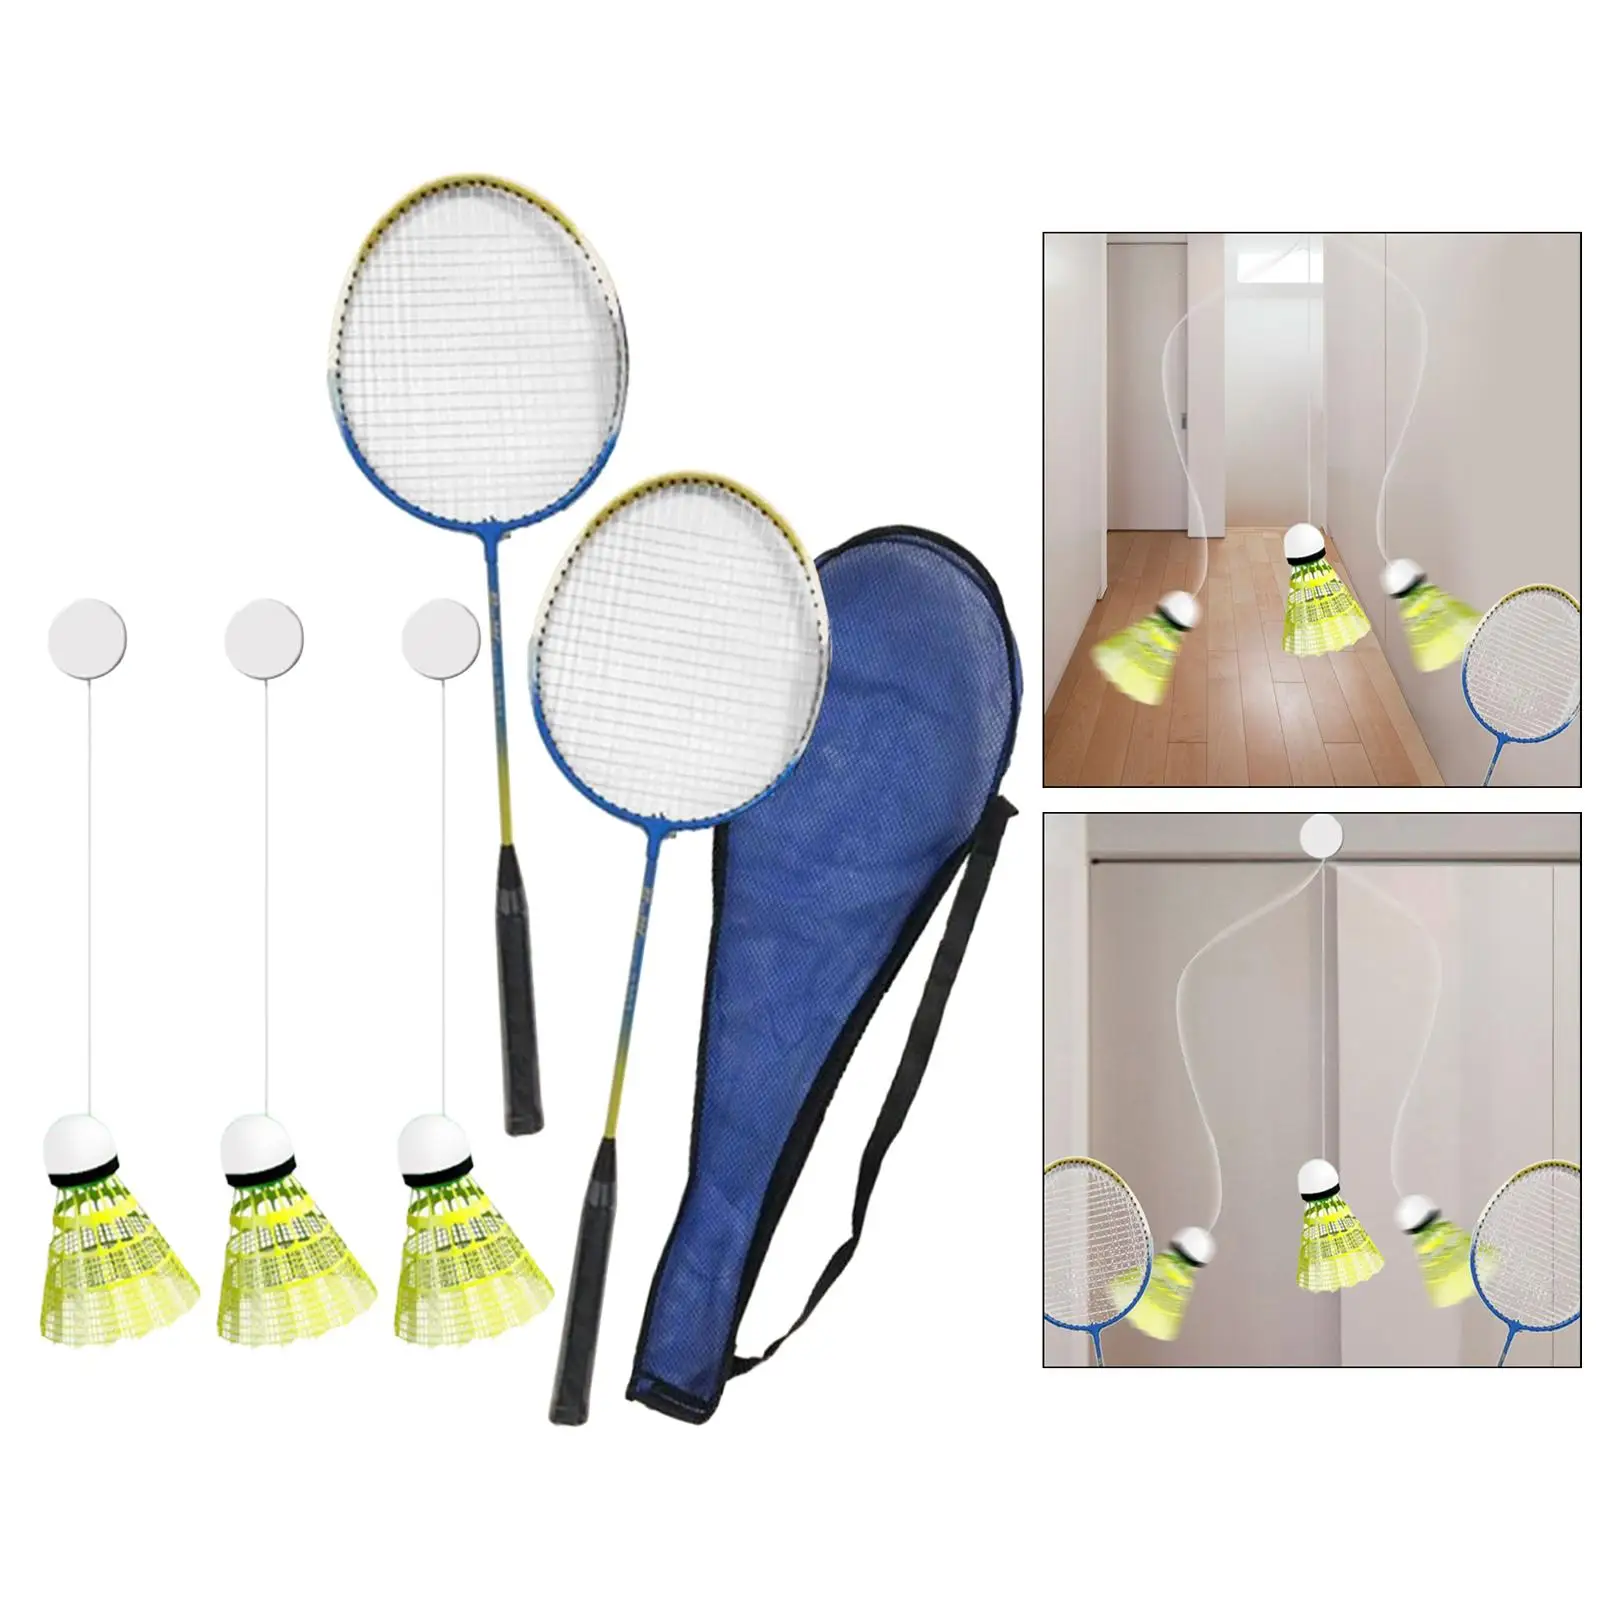 Indoor Badminton Trainer Self Training Device Tool Portable Badminton Training with Shuttlecock for Games Sports Exercise Home